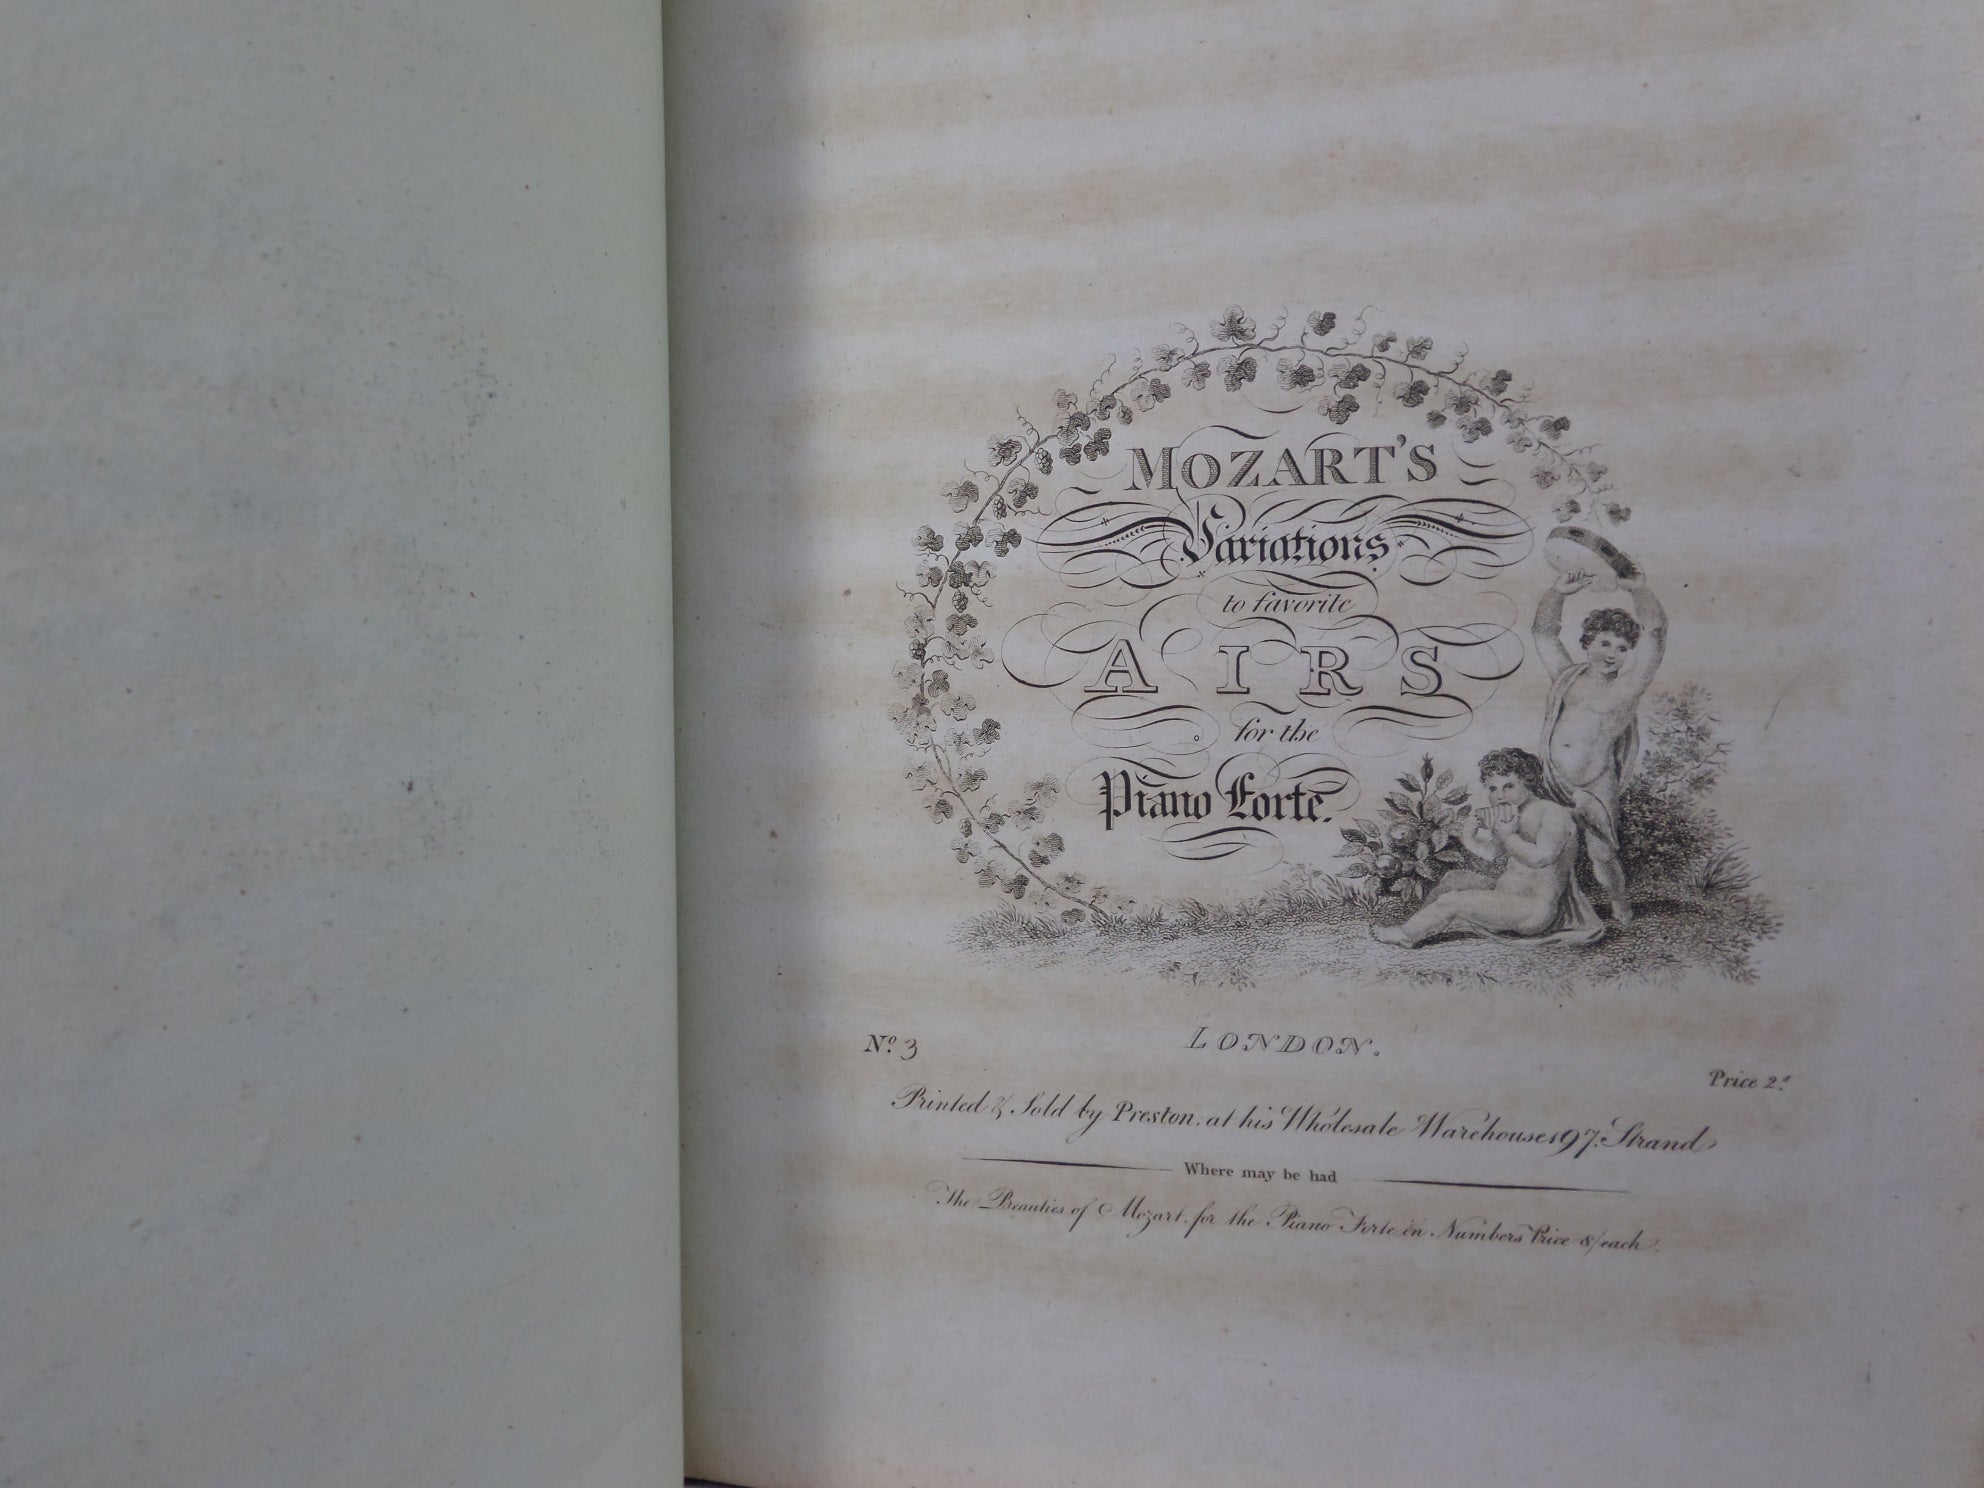 A COMPLETE EDITION OF ORIGINAL MUSIC COMPOSED FOR THE PIANO FORTE BY W.A. MOZART CA.1815